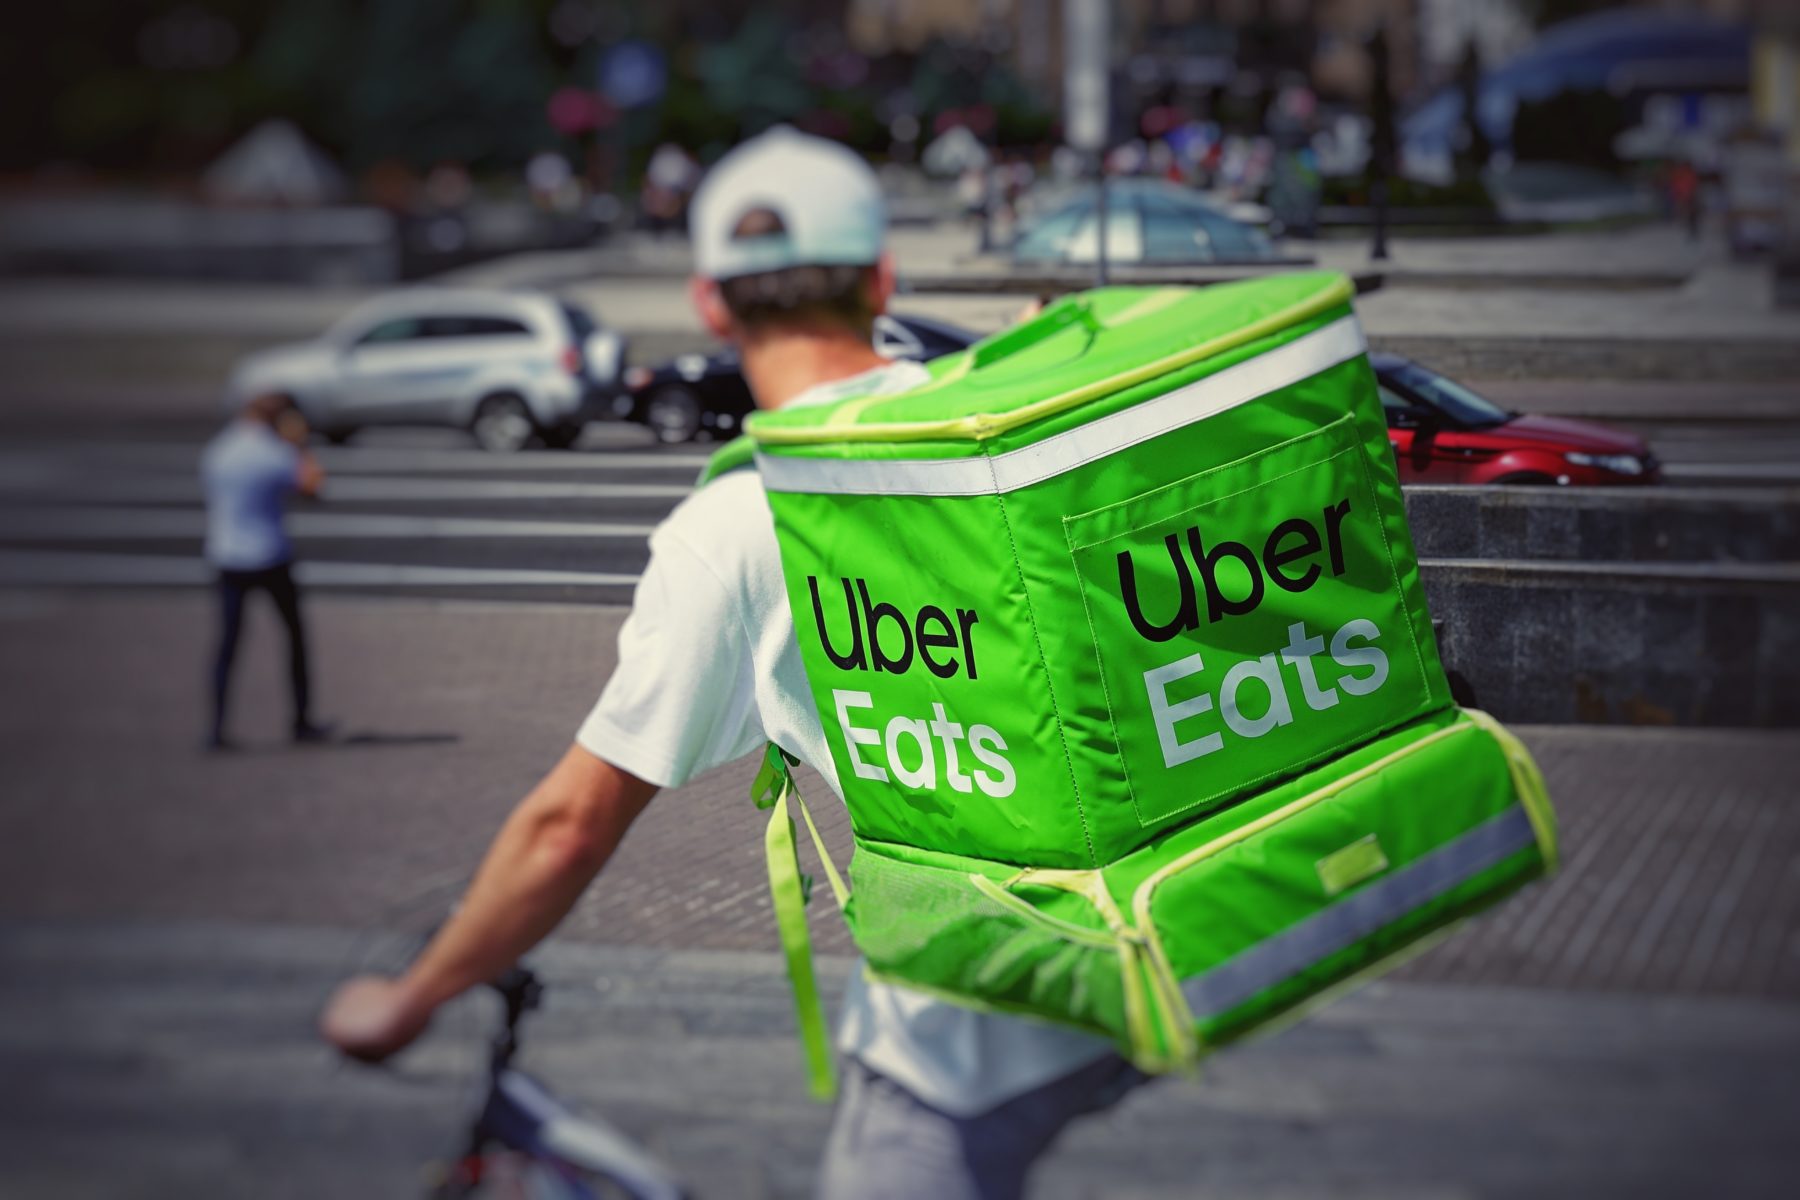 Food Delivery Drive is Disrupting Food Service Businesses